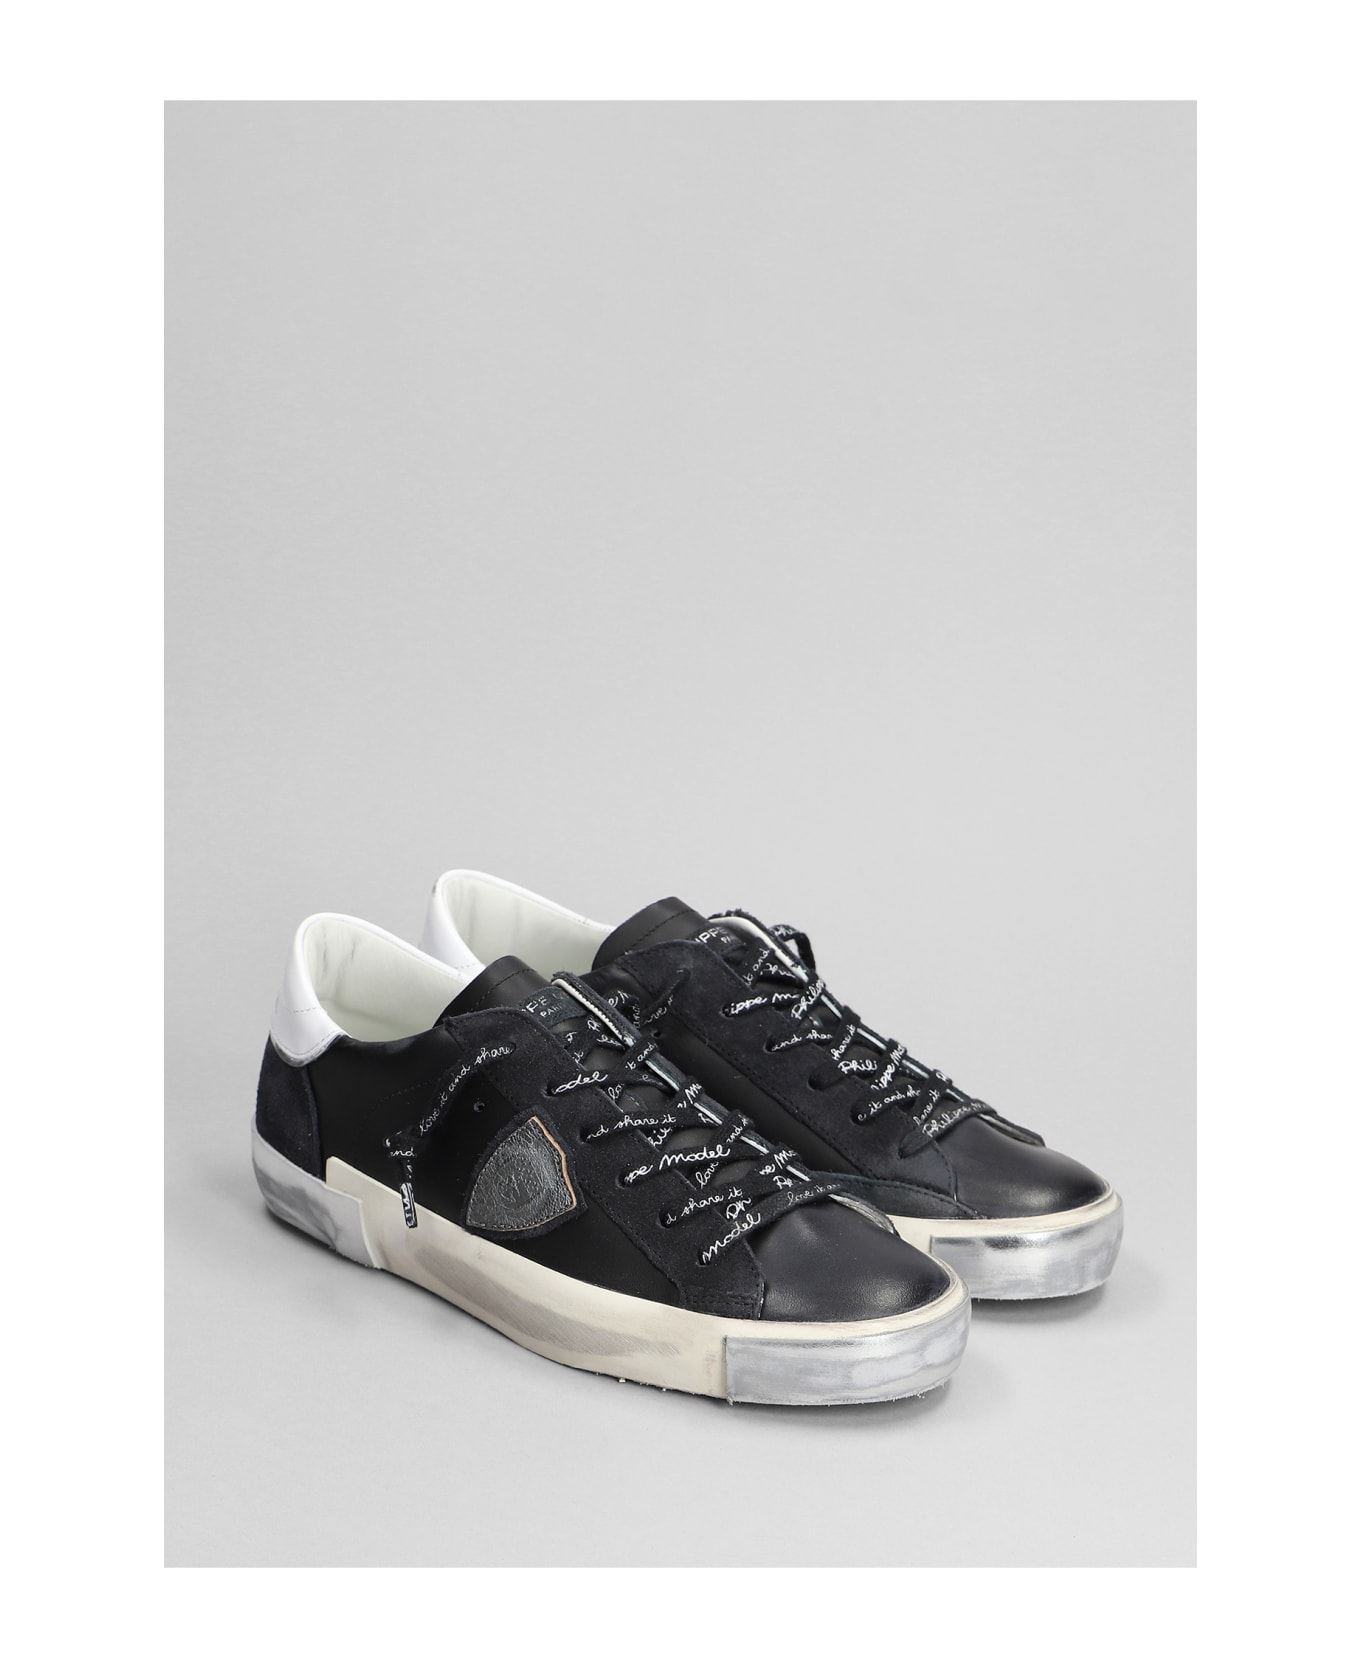 Philippe Model Prsx Low Sneakers In Black Suede And Leather - black